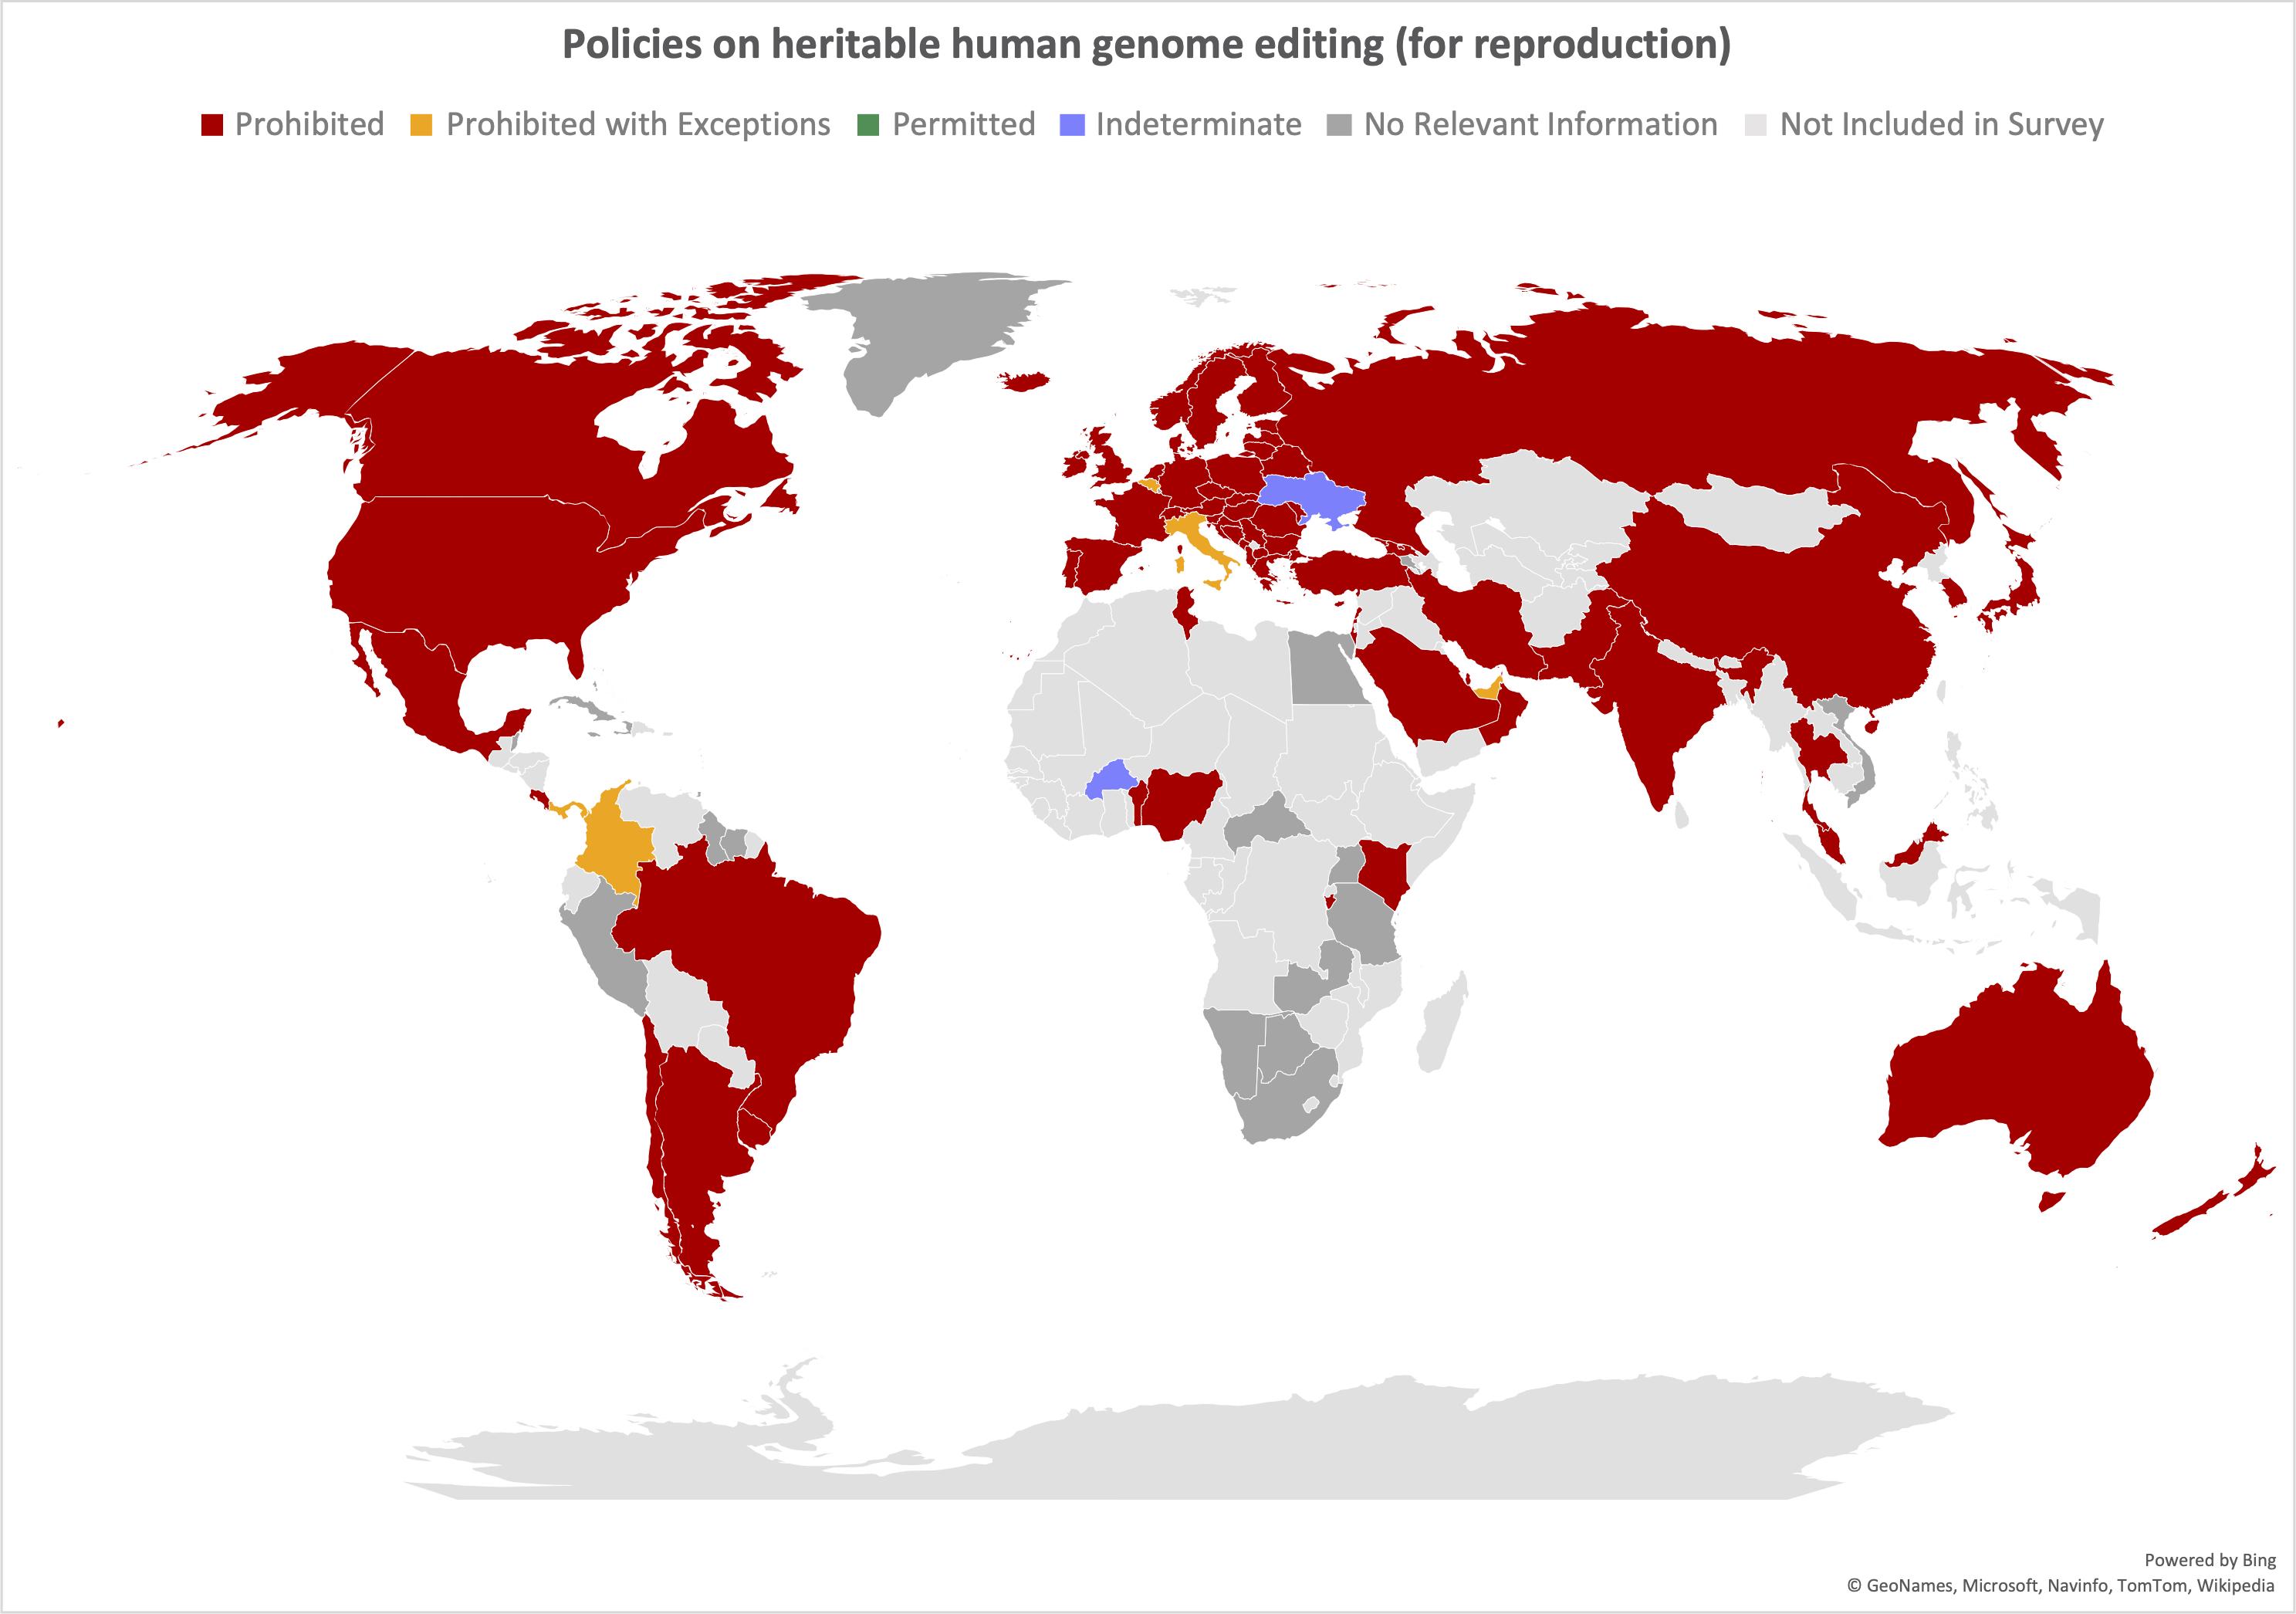 World map showing countries that prohibit heritabl human genome editing in red